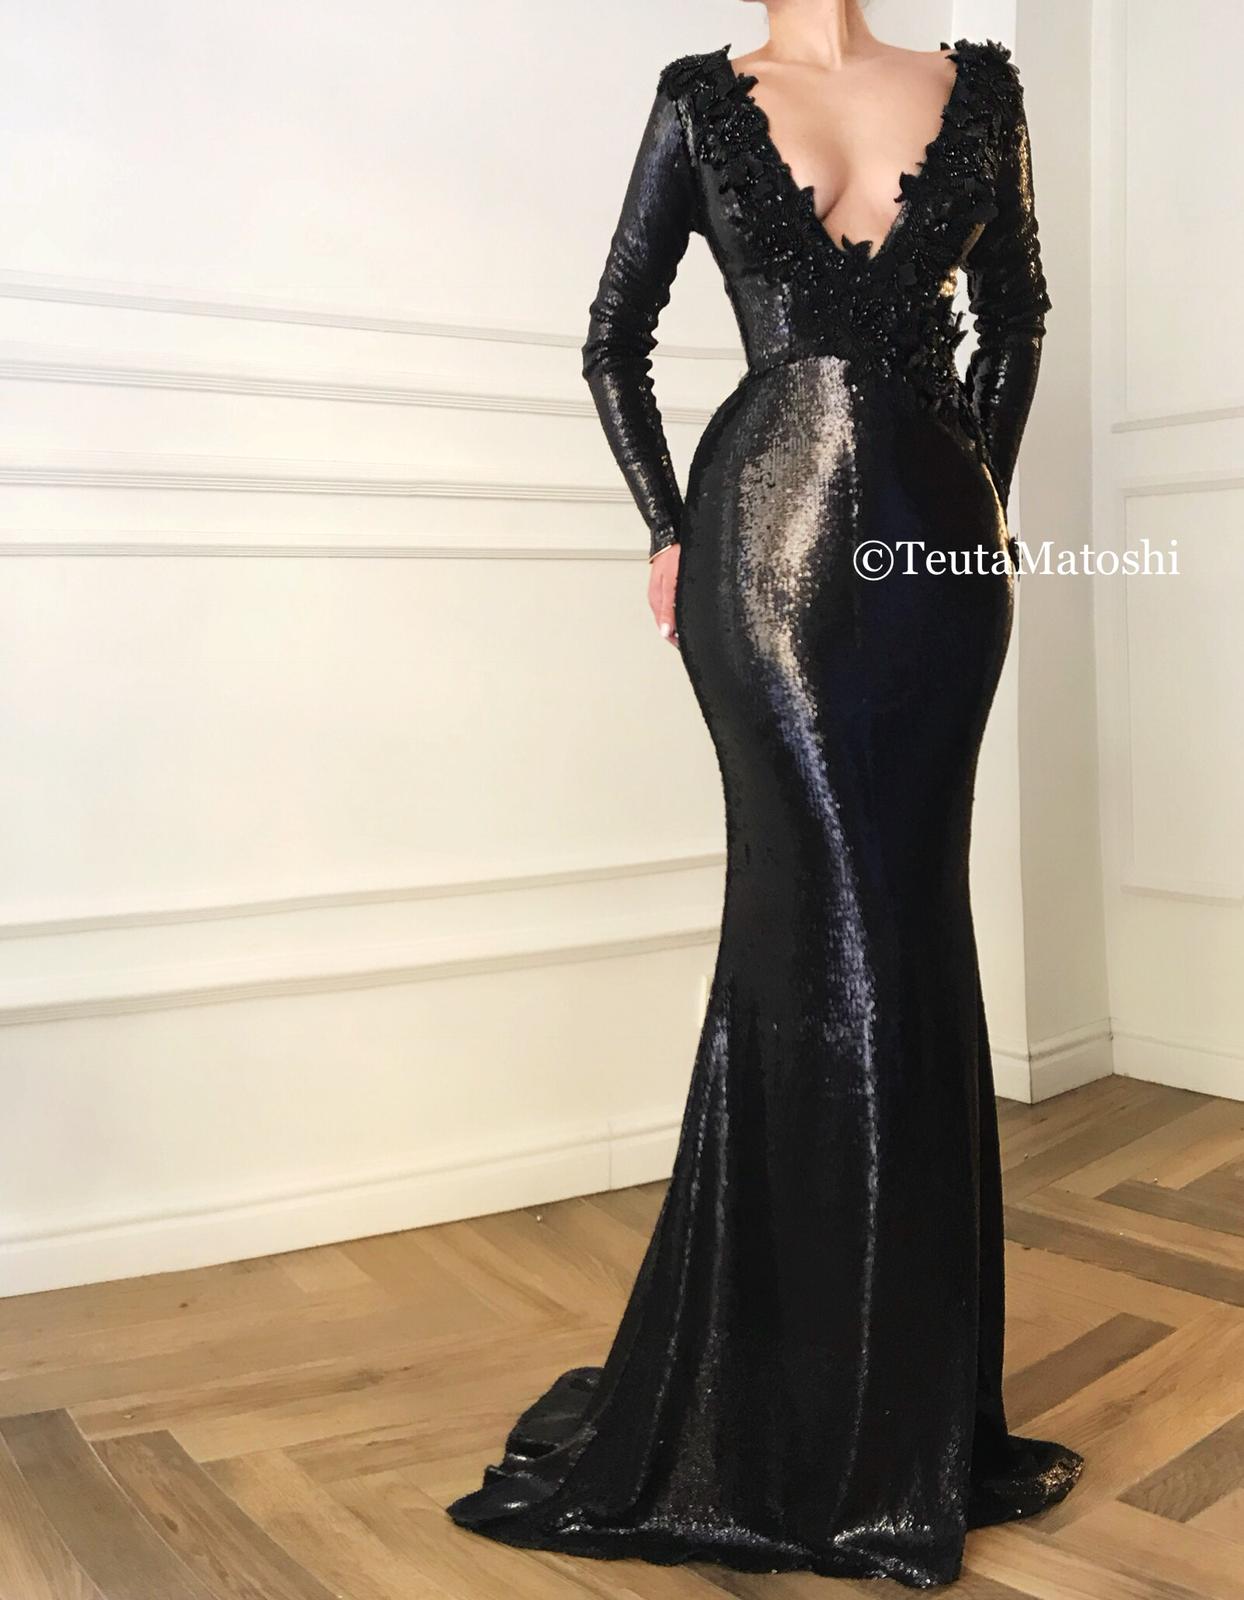 Black mermaid dress with long sleeves, v-neck and embroidery